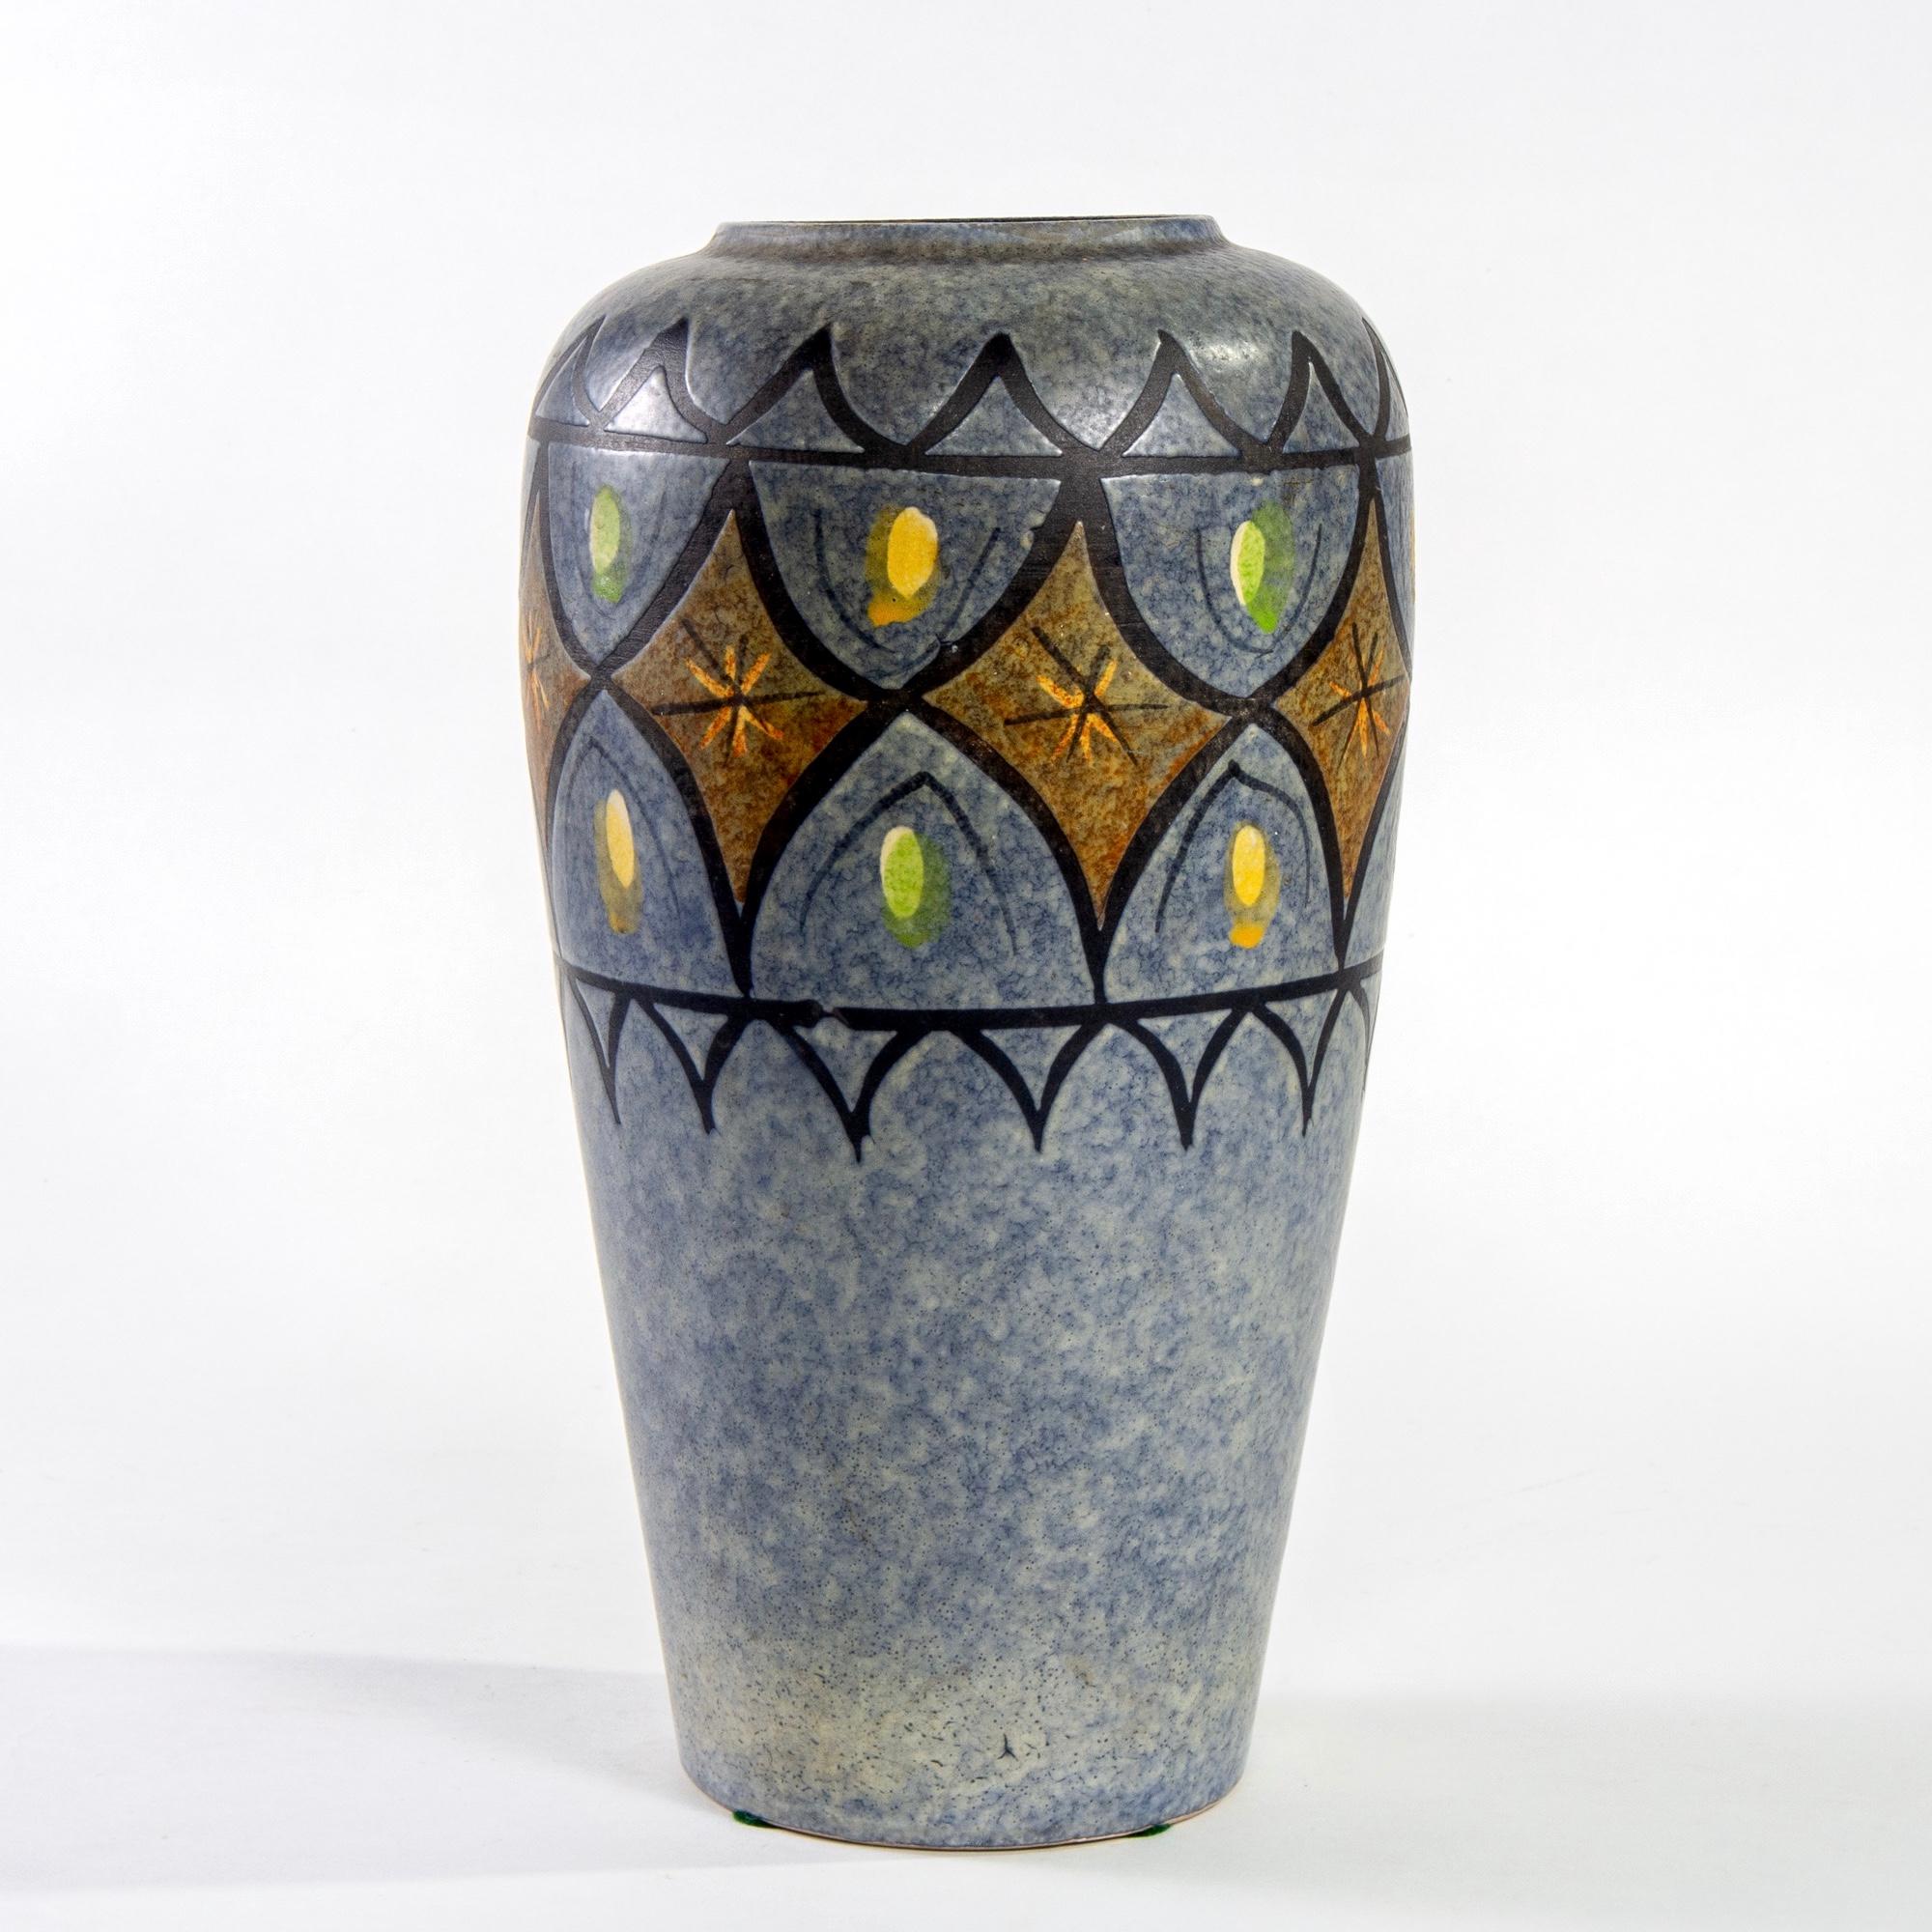 West German tall ceramic vase has a gray blue glaze with a bold incised and glazed decorative border at the top, circa 1960s. Unknown maker - we cannot make out manufacturer’s numbers on underside of base, but this is probably made by